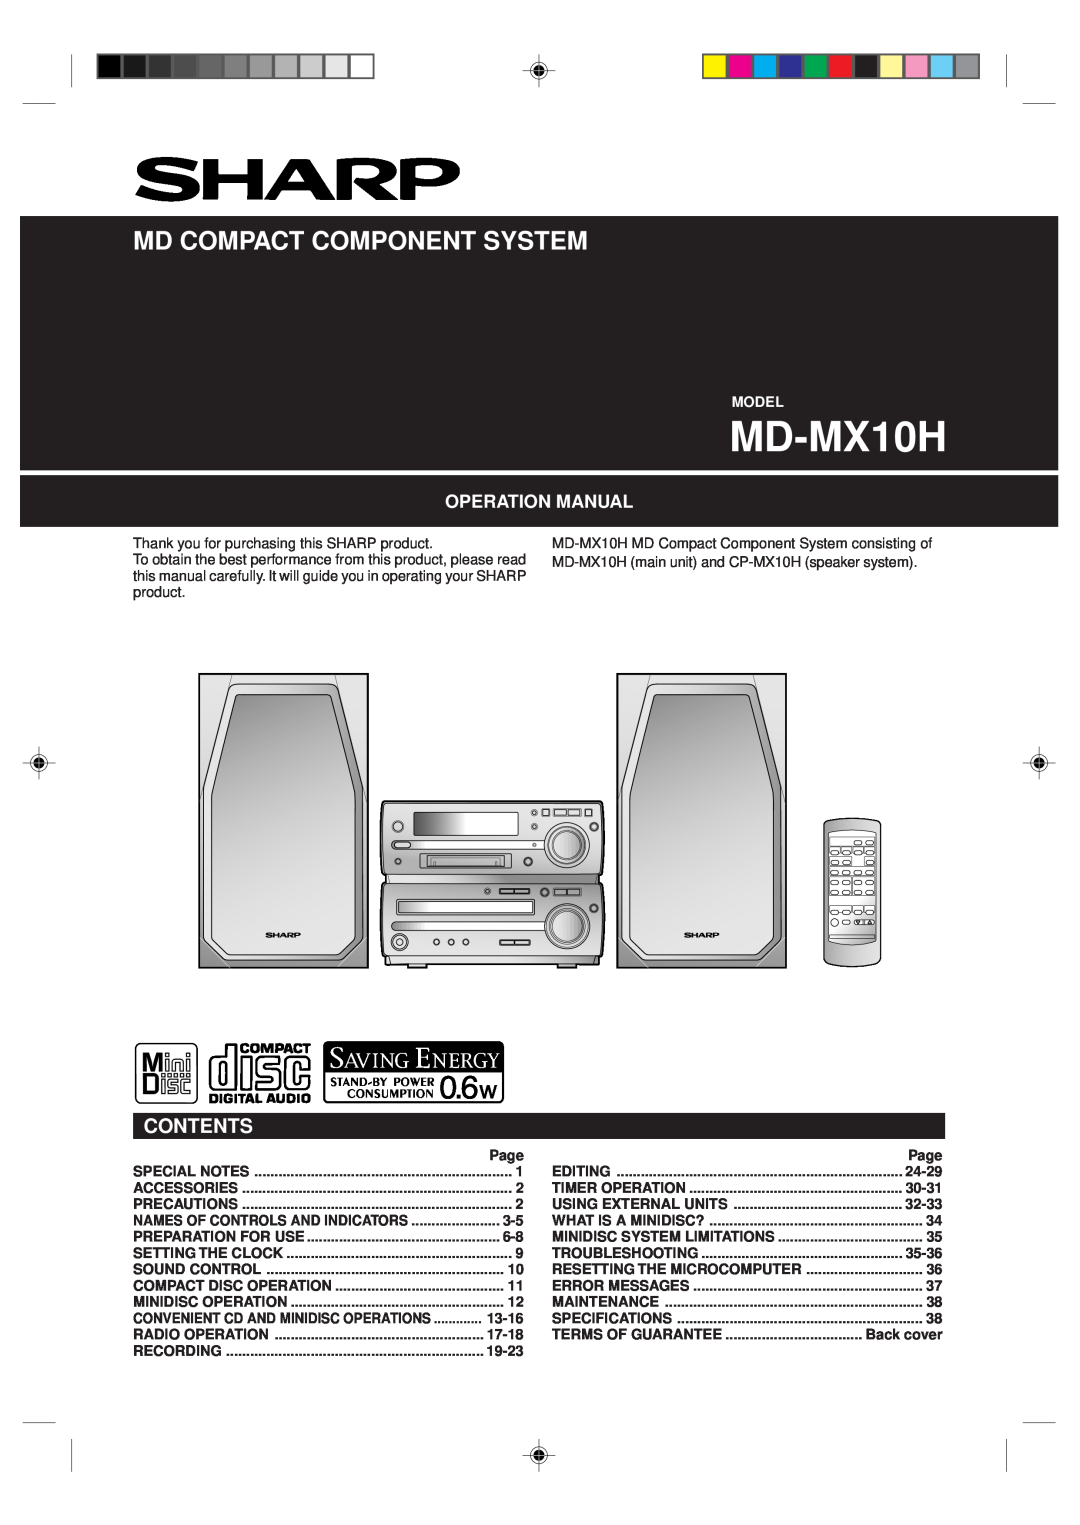 Sharp MD-MX10H operation manual Contents, Md Compact Component System, Model 